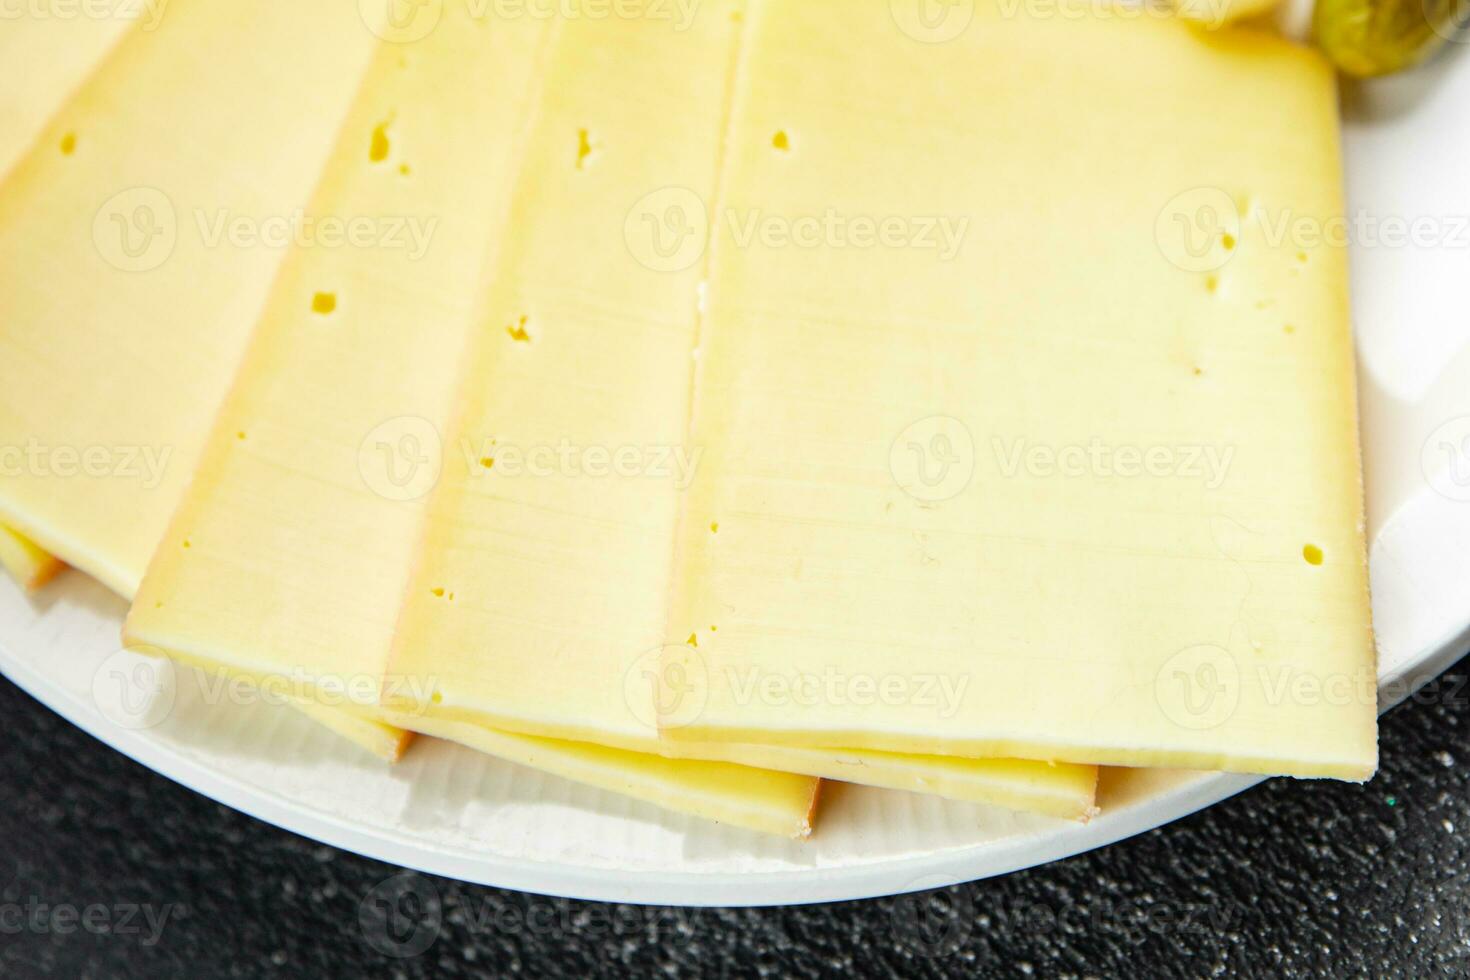 raclette cheese meal vegetable snack eating cooking appetizer meal food snack on the table photo